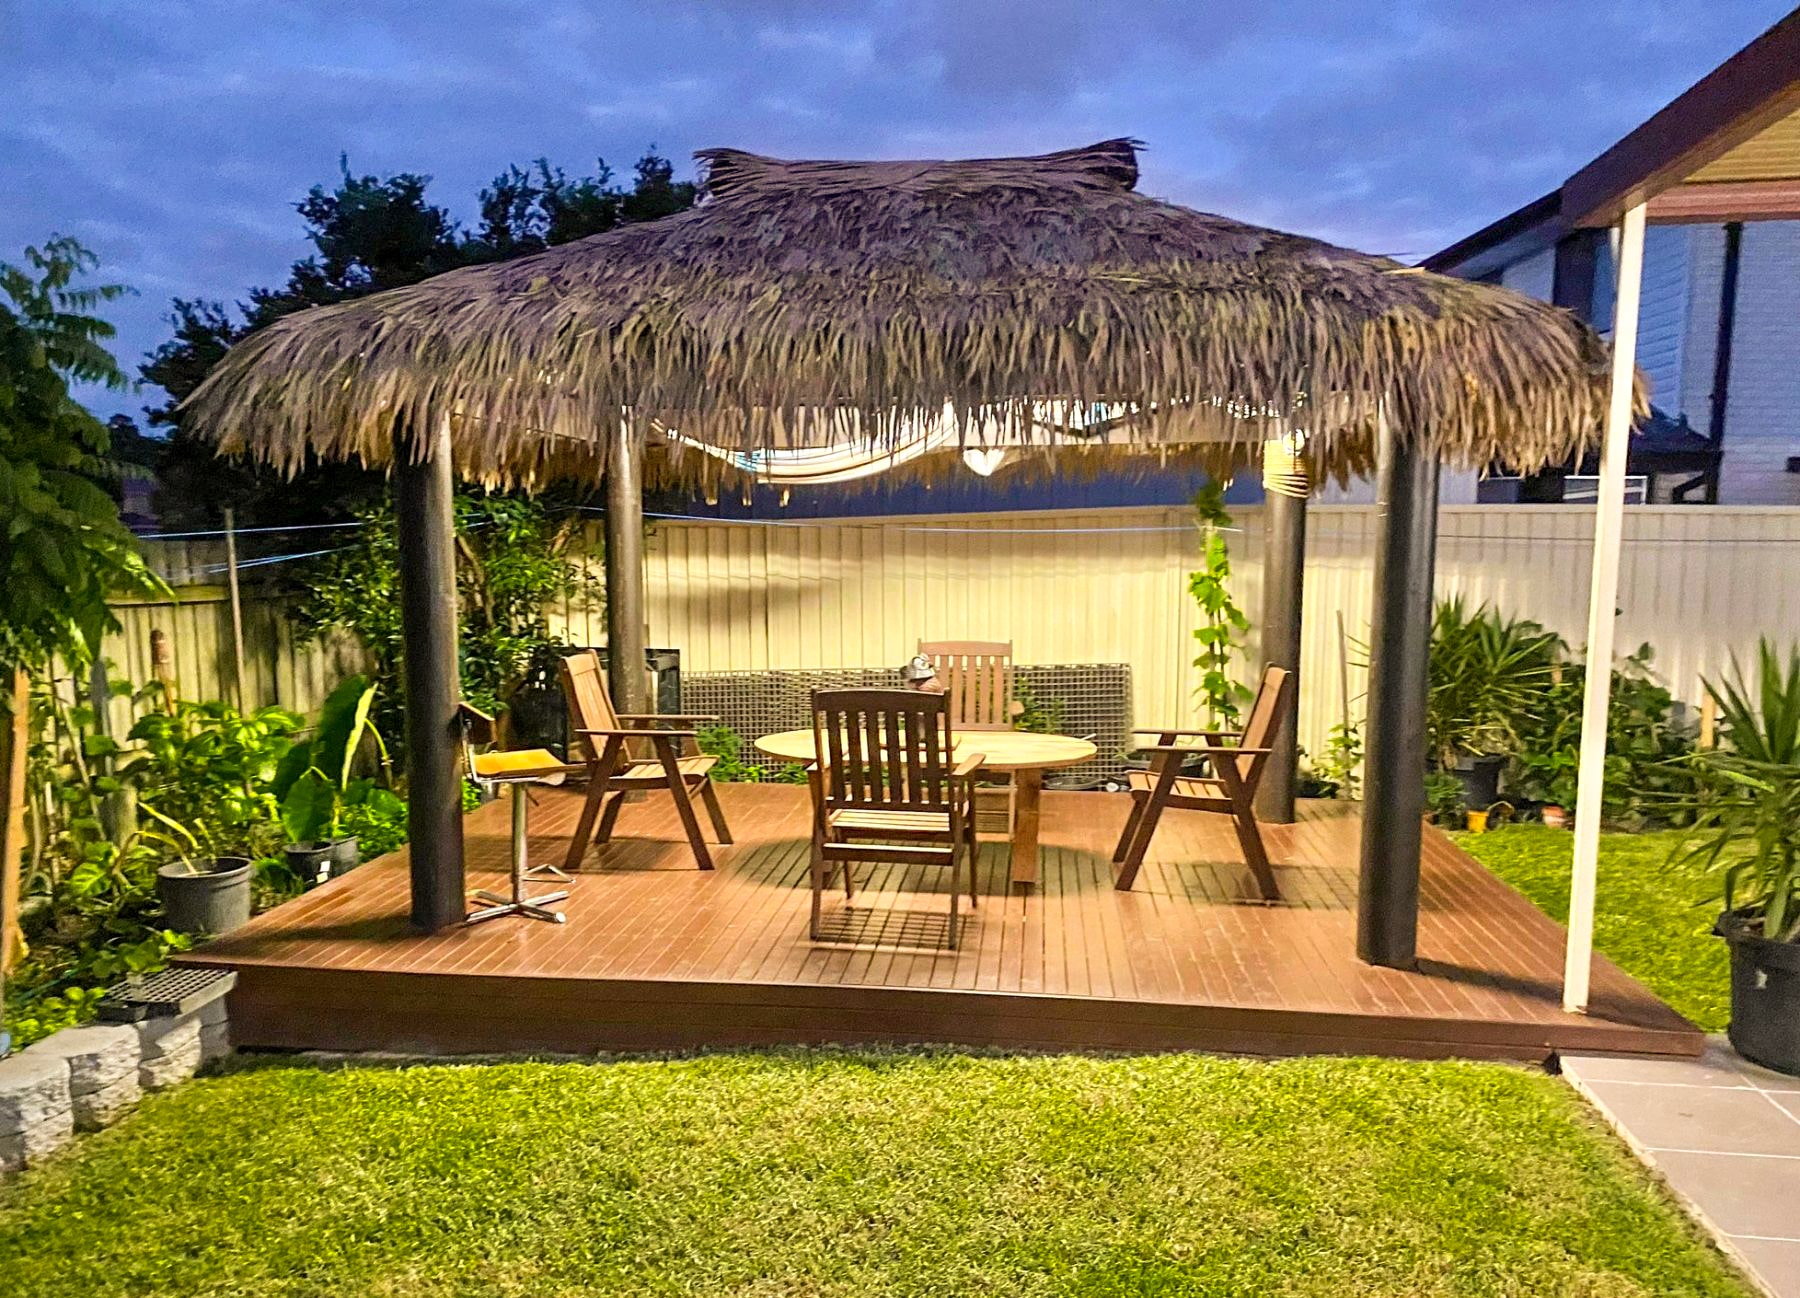 Backyard palapa with synthetic thatch at night.